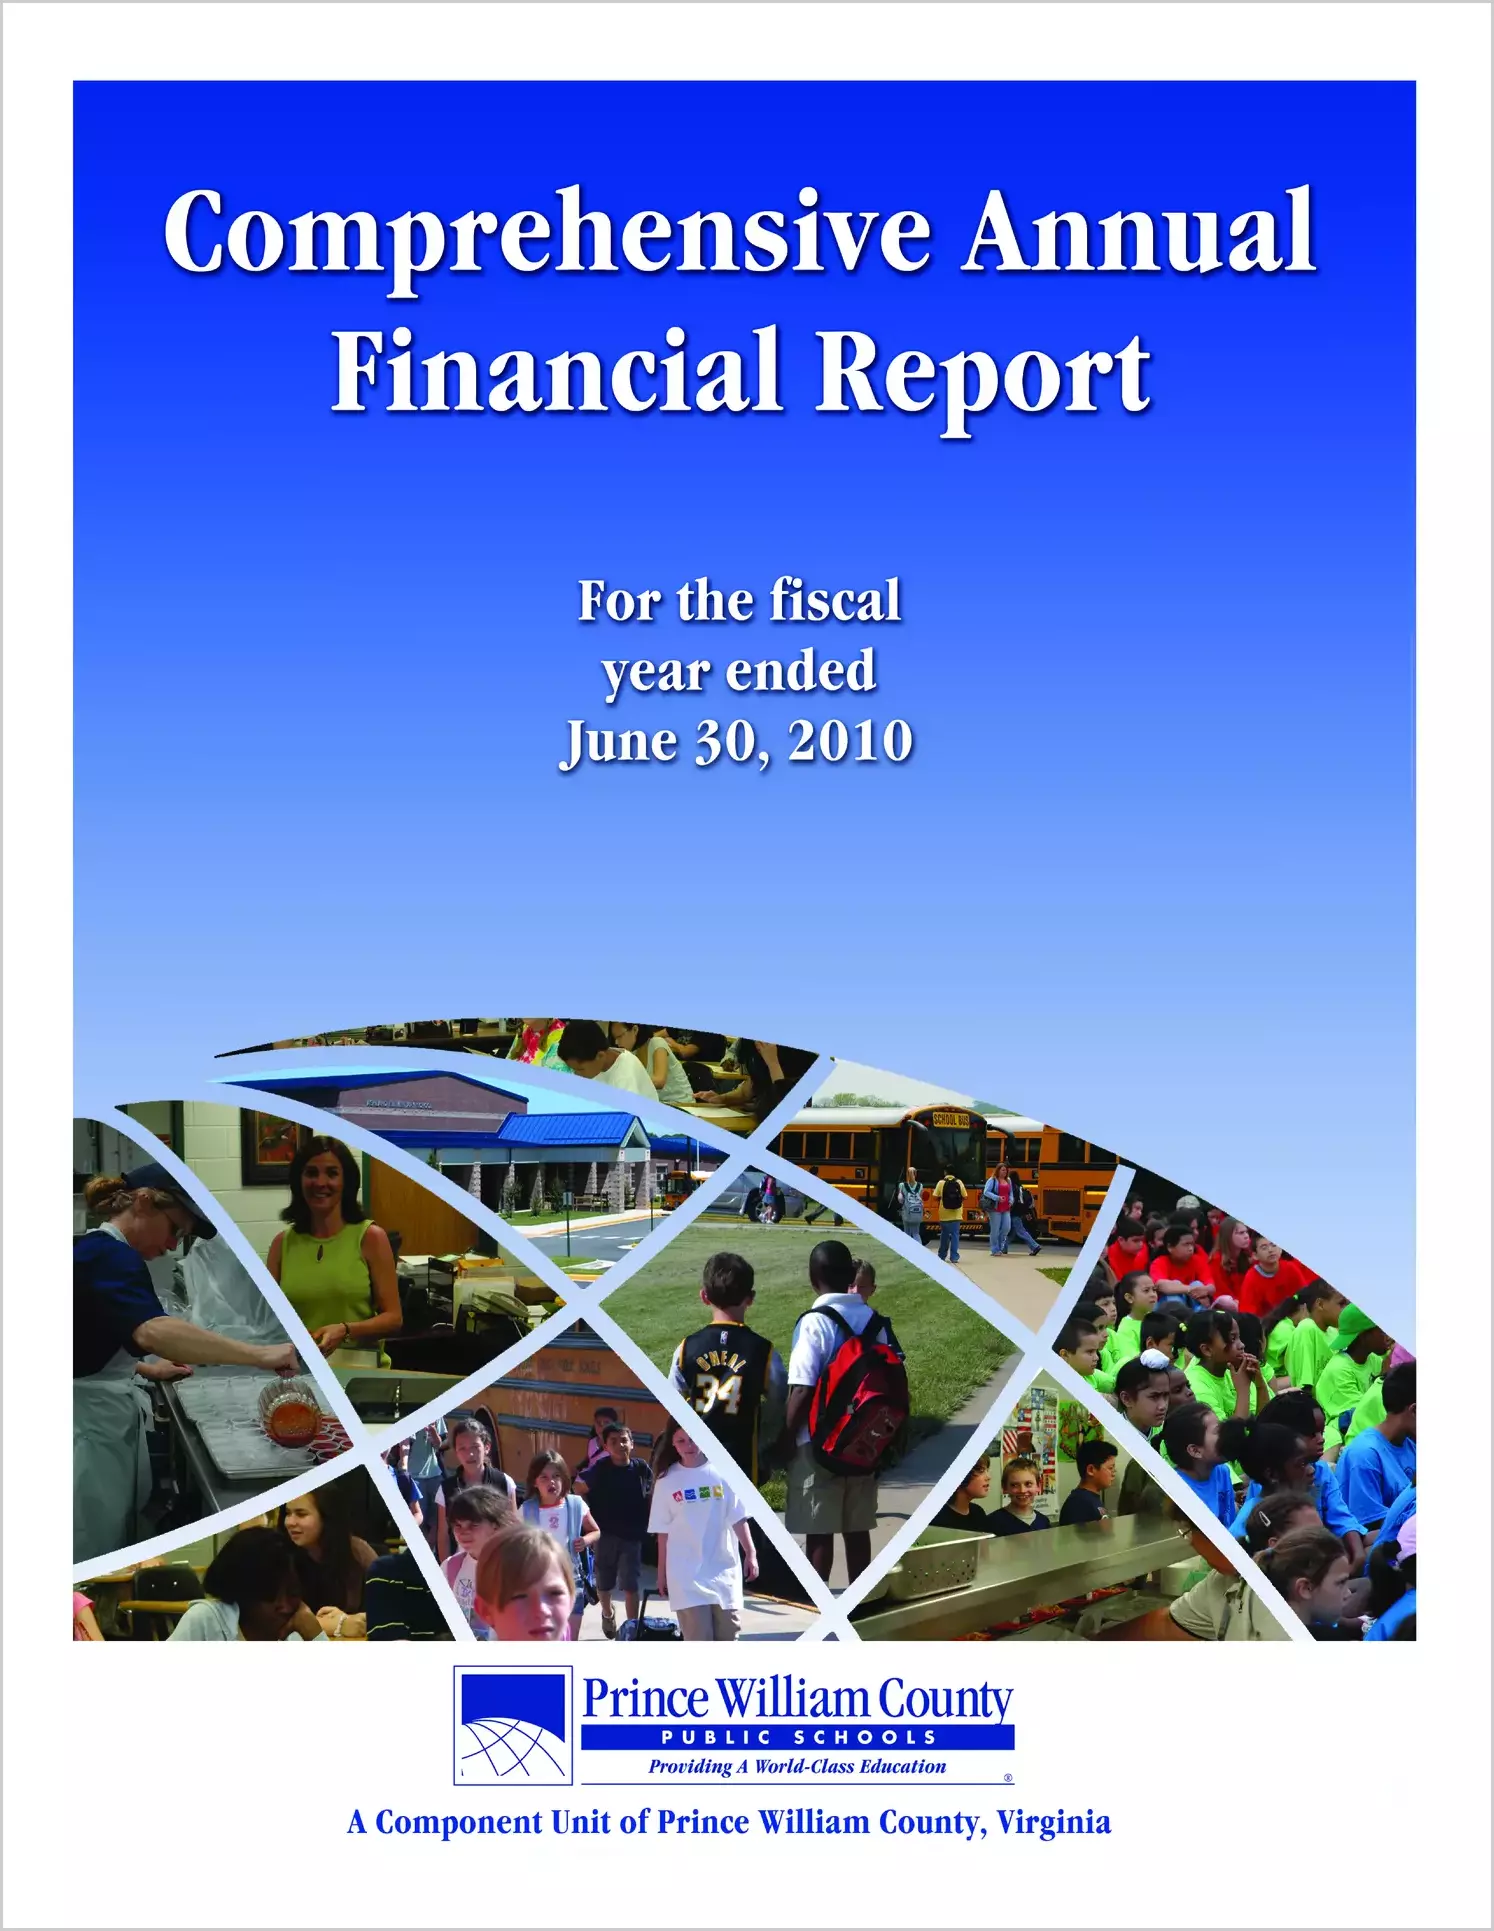 2010 Public Schools Annual Financial Report for County of Prince William